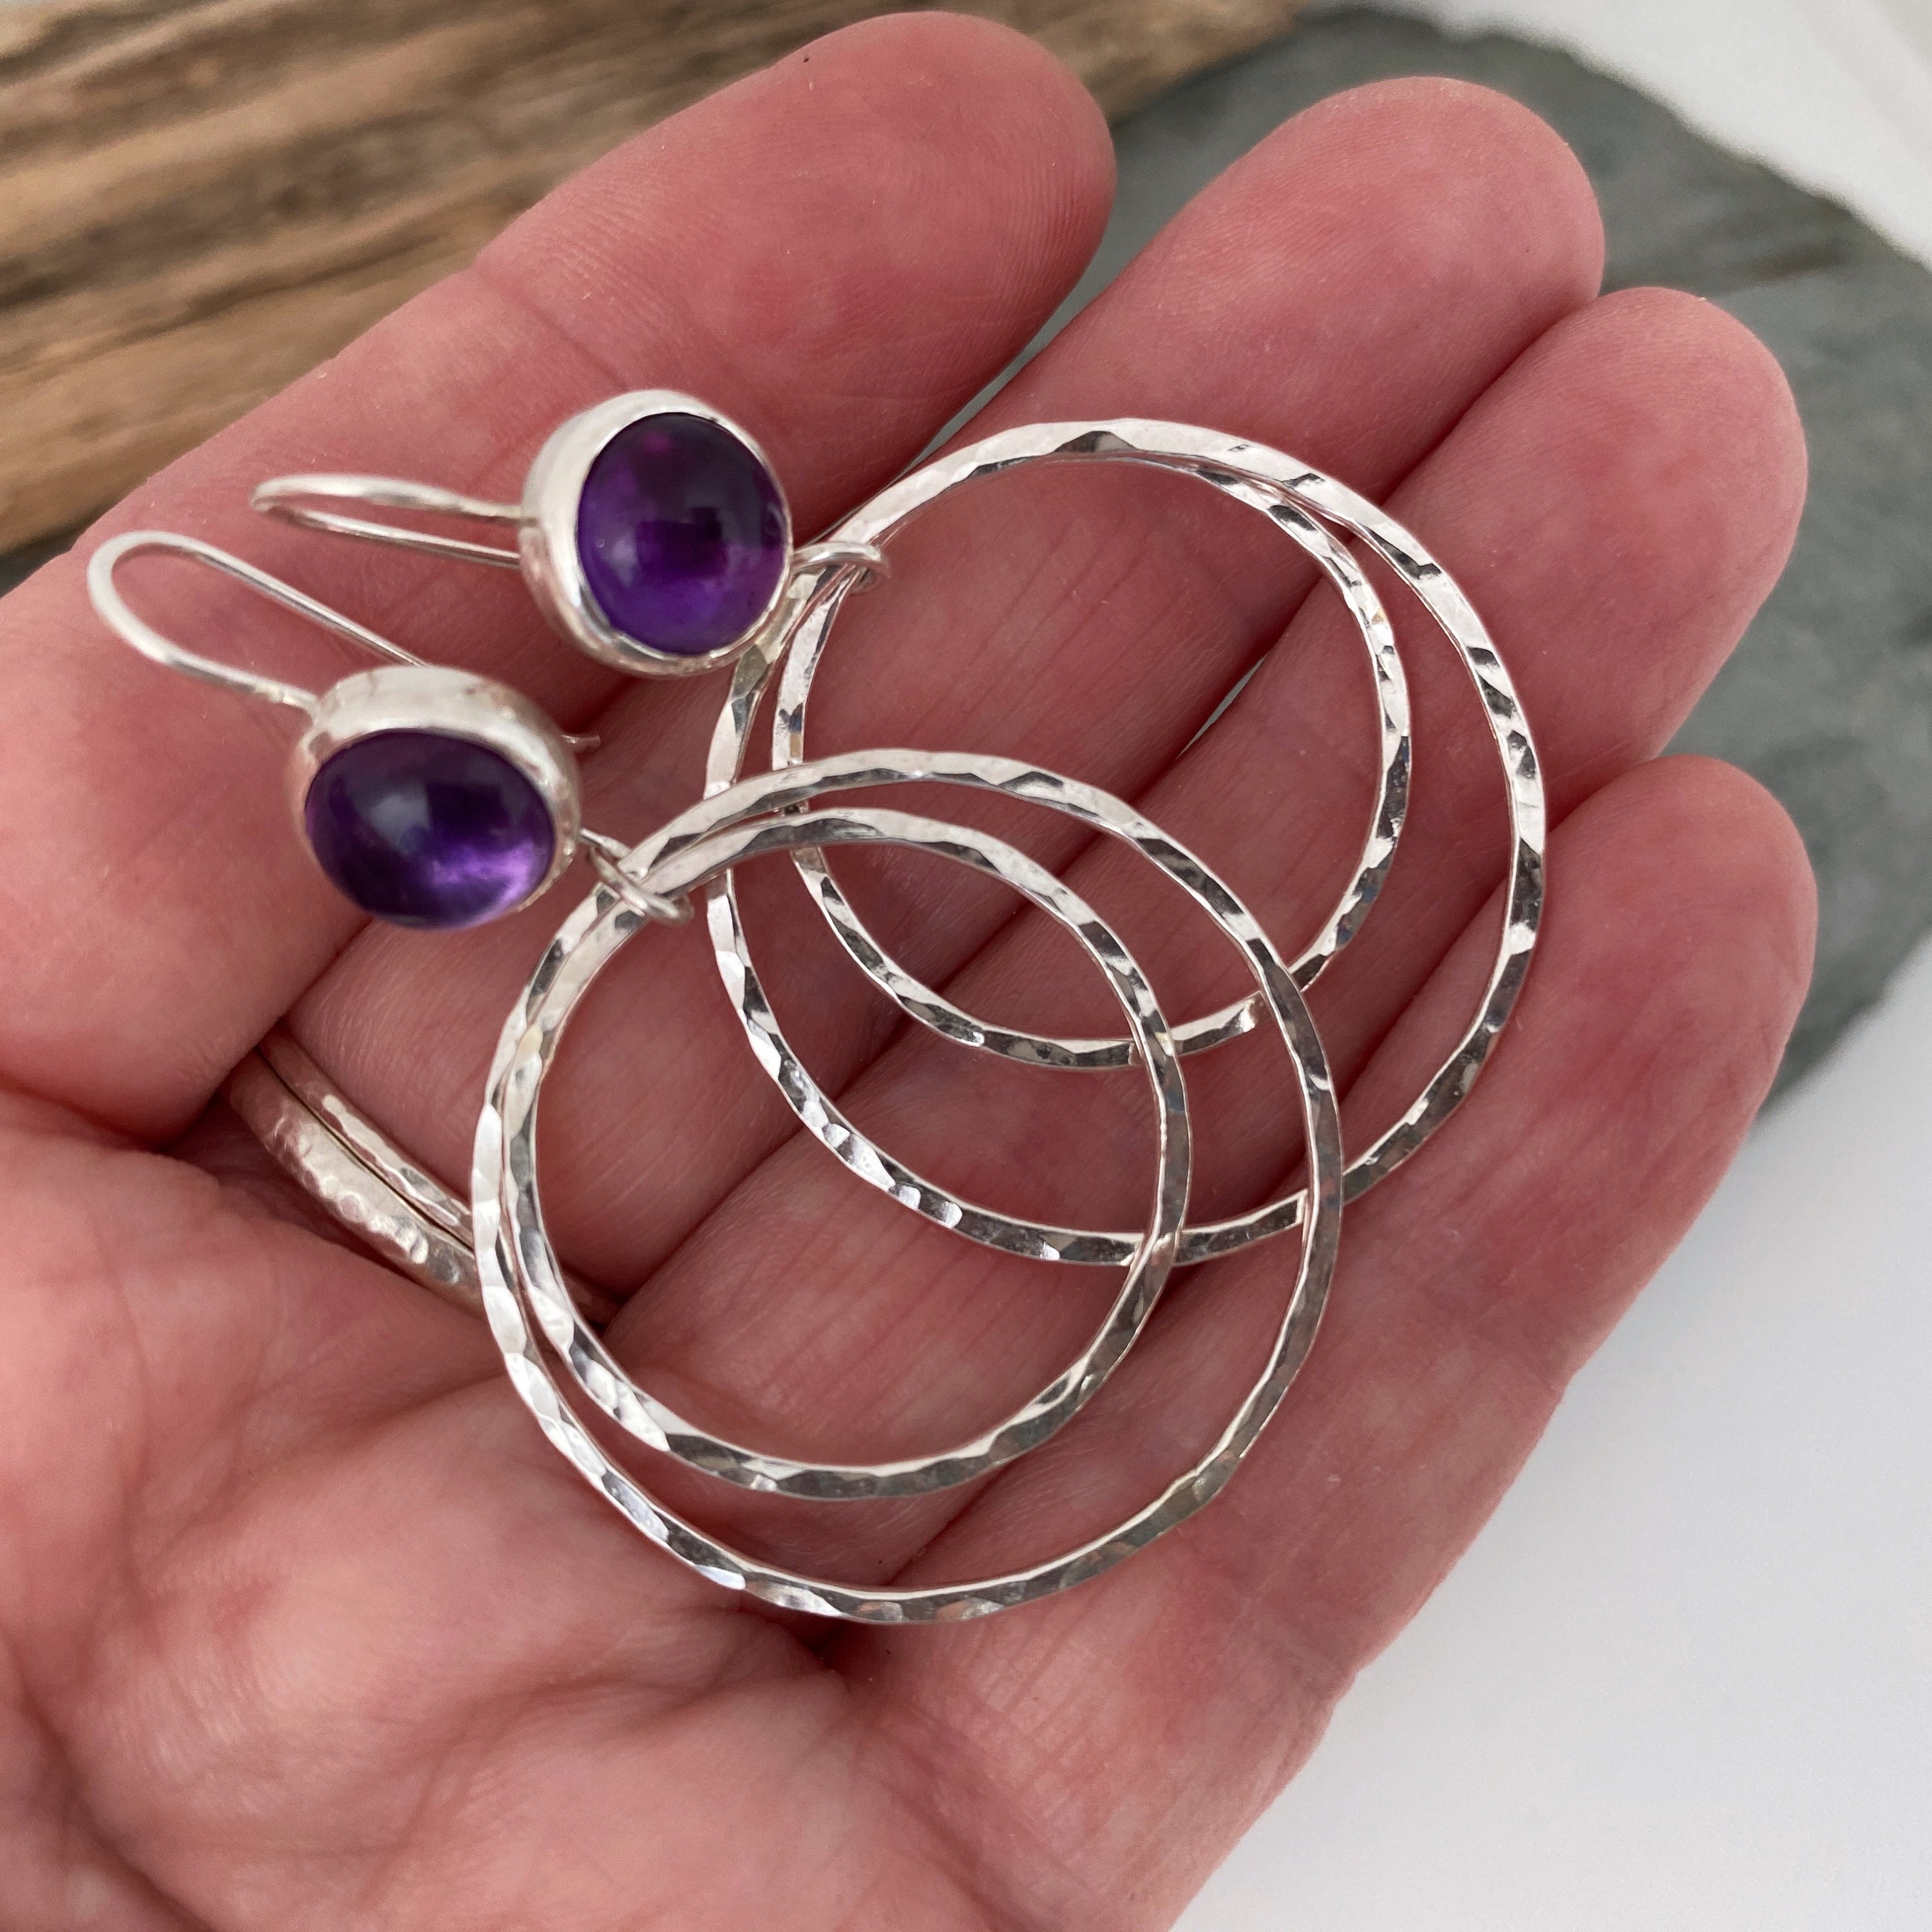 Large Silver Hoop Earrings Topped With Vibrant Purple Amethyst Gemstones. Earrings. Round Unique